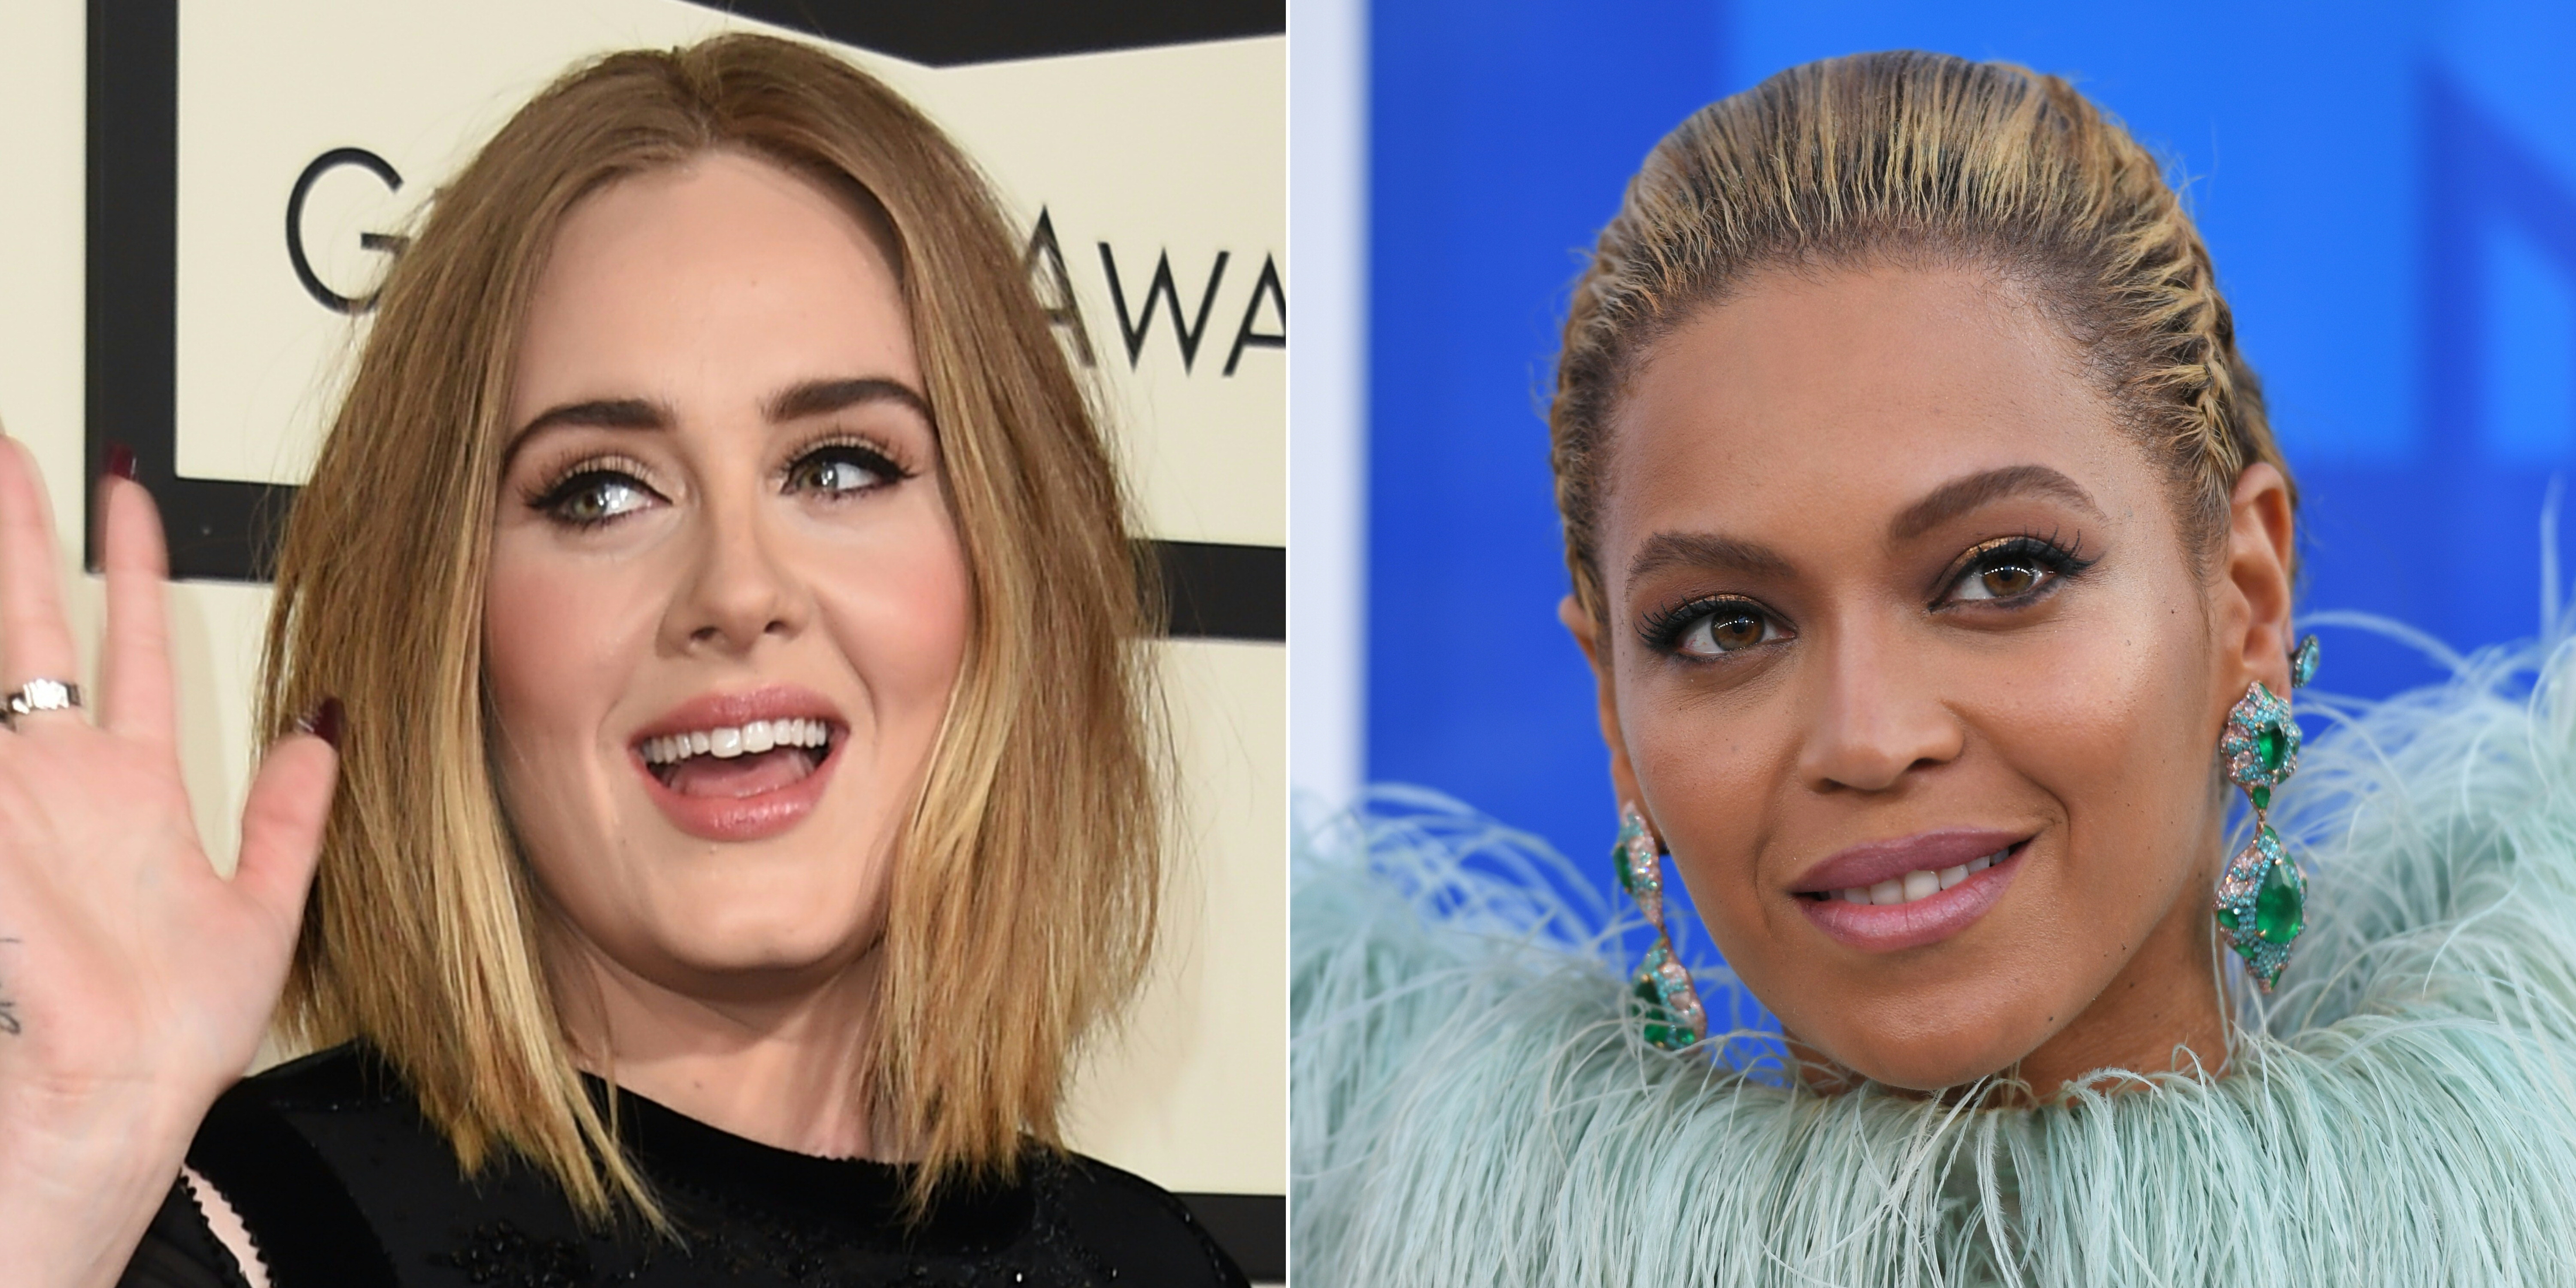 (COMBO) This combination of pictures created on December 06, 2016 shows recent images of British Singer Adele (L) and US singer Beyonce.  Adele and Beyonce each won nominations December 6, 2016 in three of the four top Grammy categories, setting the stage for a battle between the two singers to dominate music's biggest awards. / AFP PHOTO / VALERIE MACON AND Angela Weiss